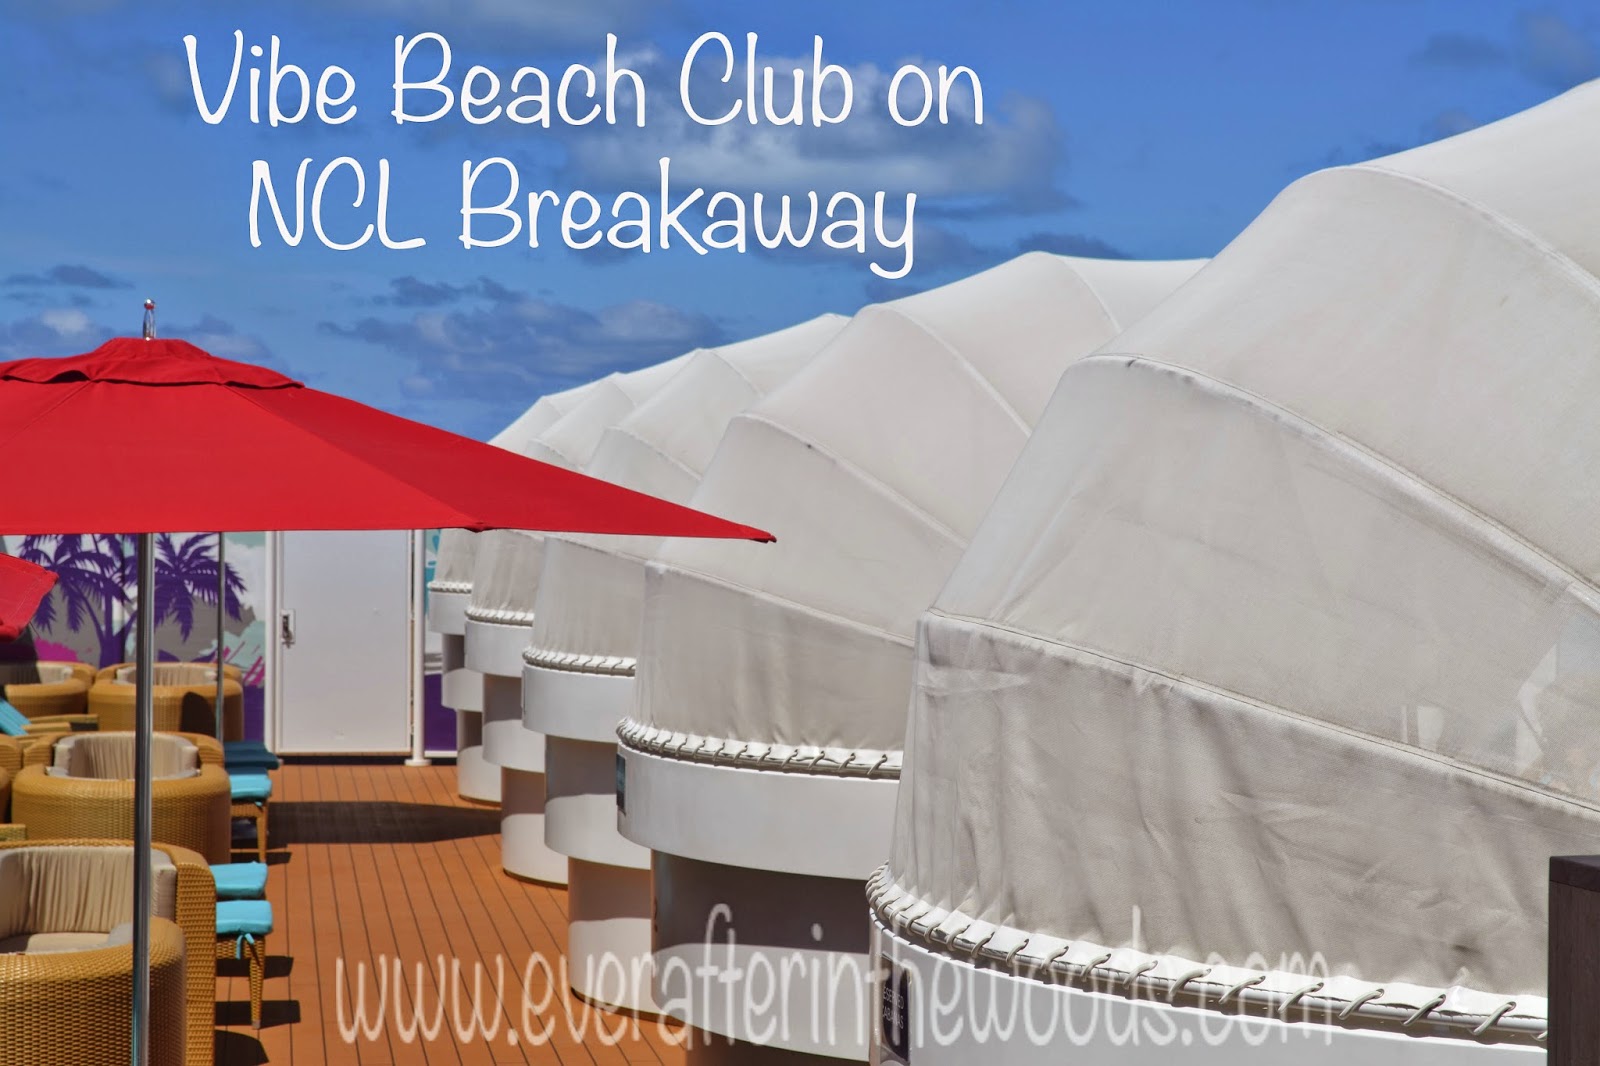 Vibe Beach Club on Norwegian Breakaway - Ever After in the Woods